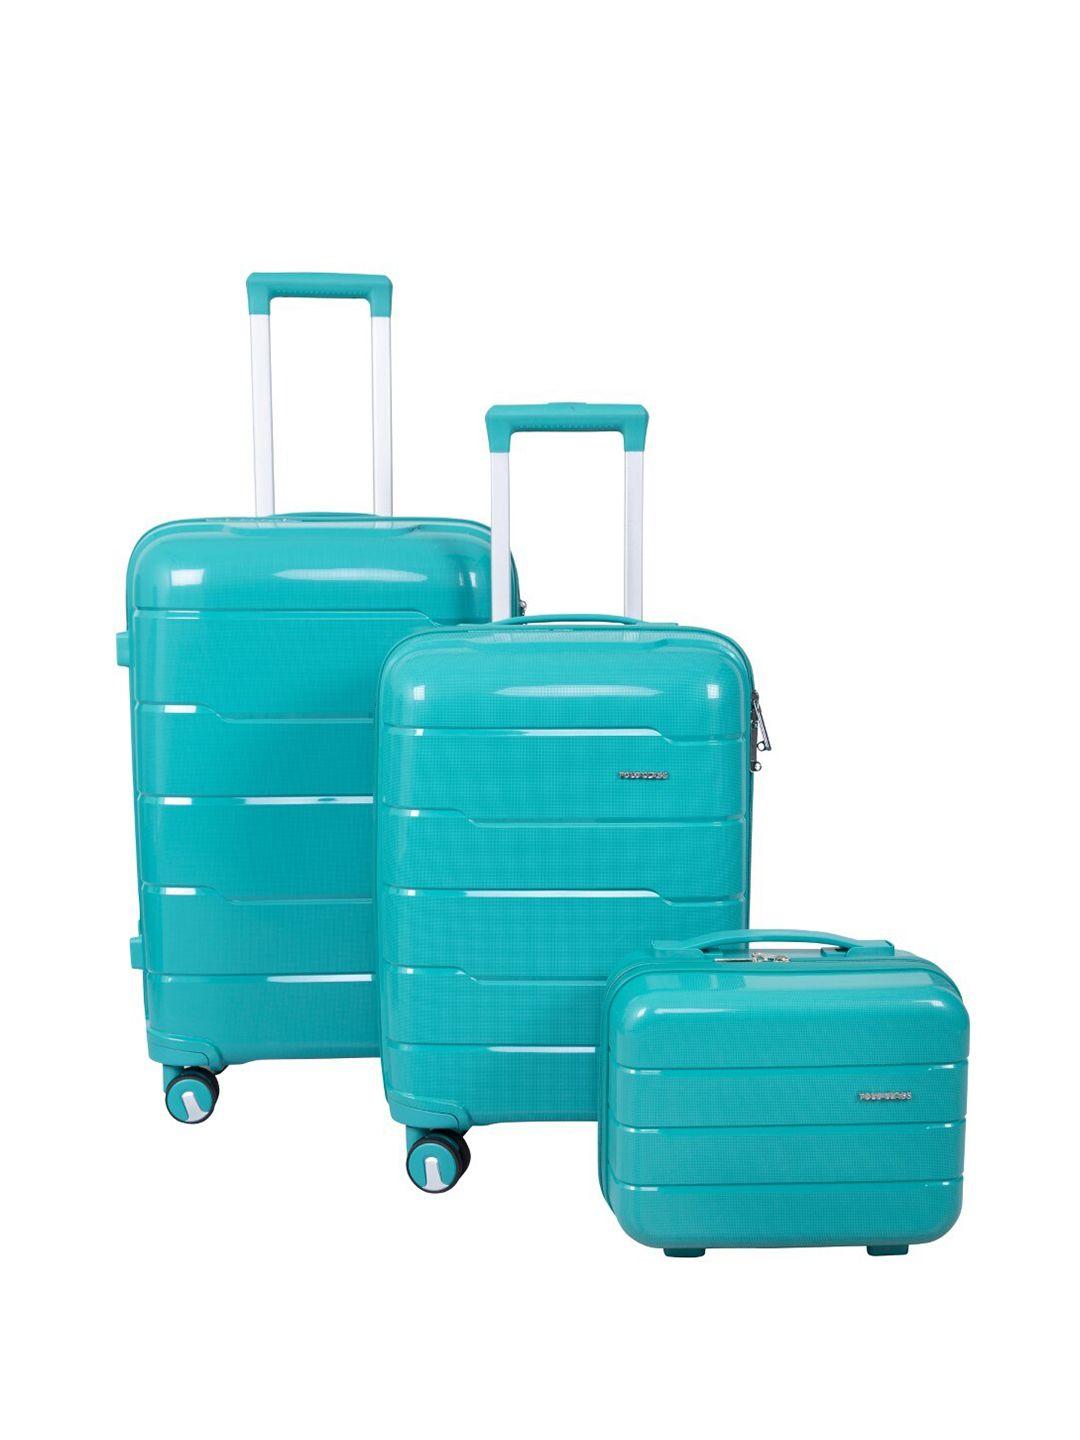 polo class set of 2 hard-sided trolley suitcases & 1 vanity bags-50 l